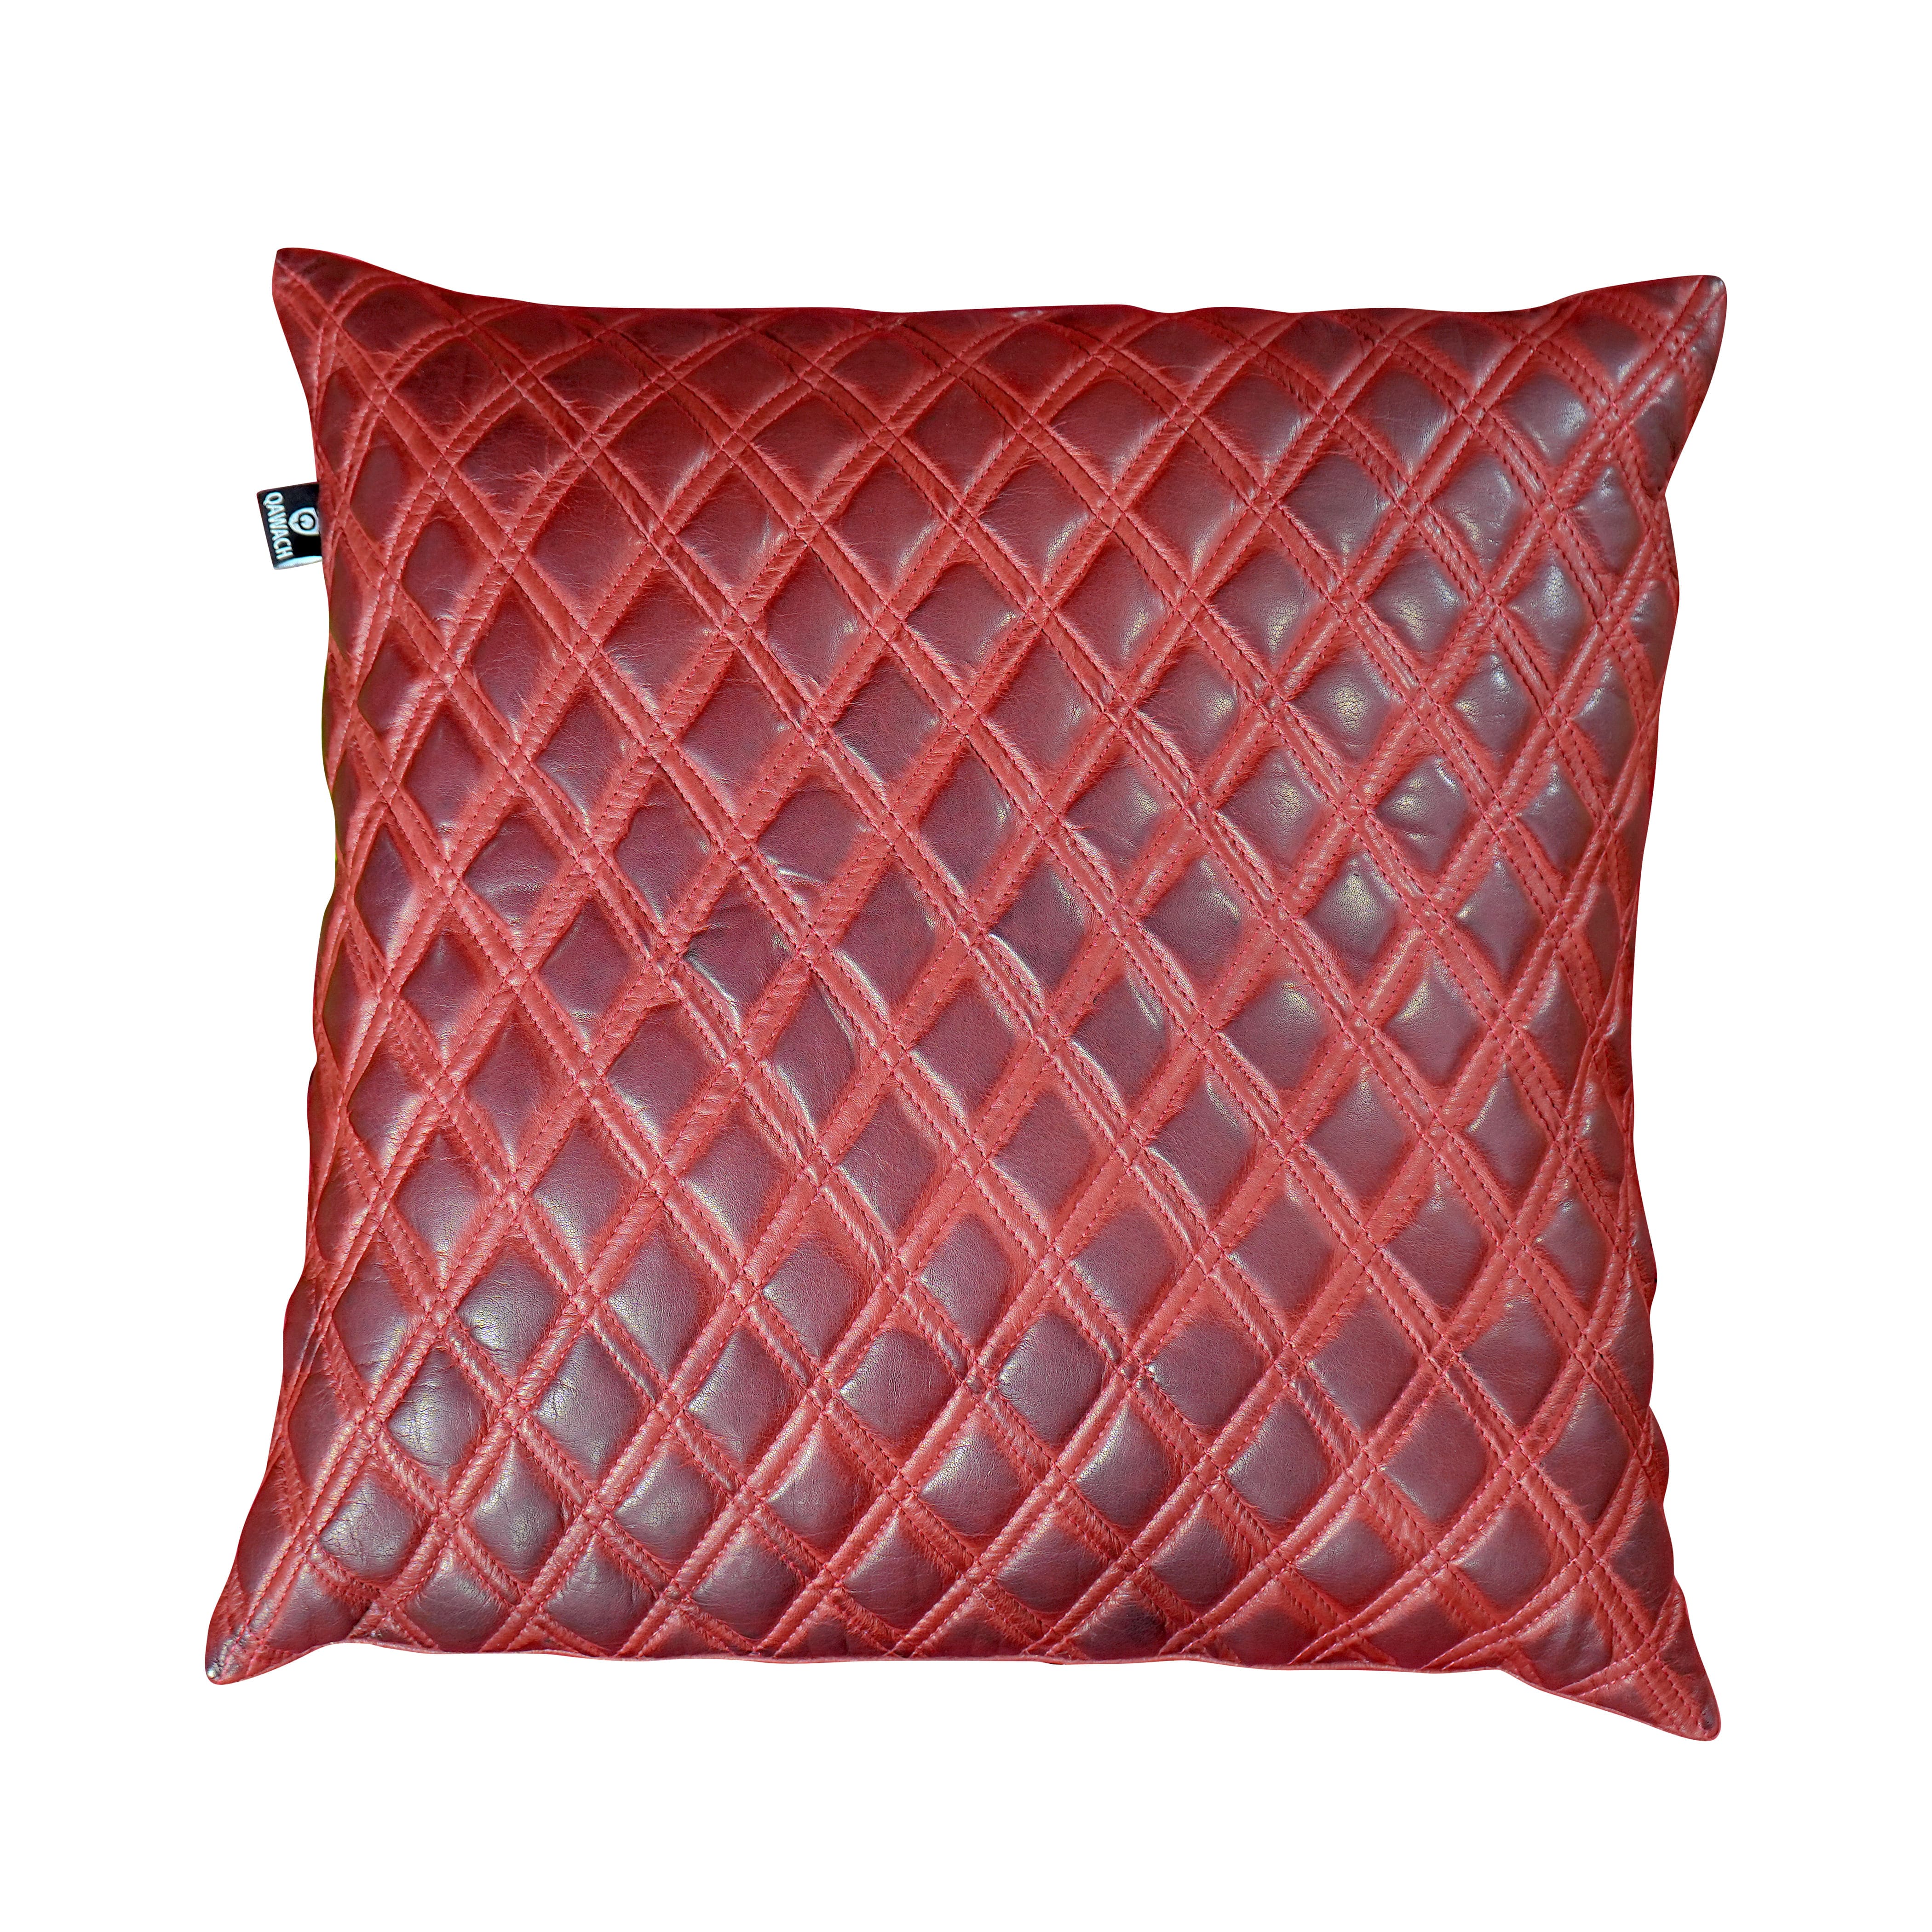 Shop Maroon Quilted Leather Pillow Cover | QAWACH